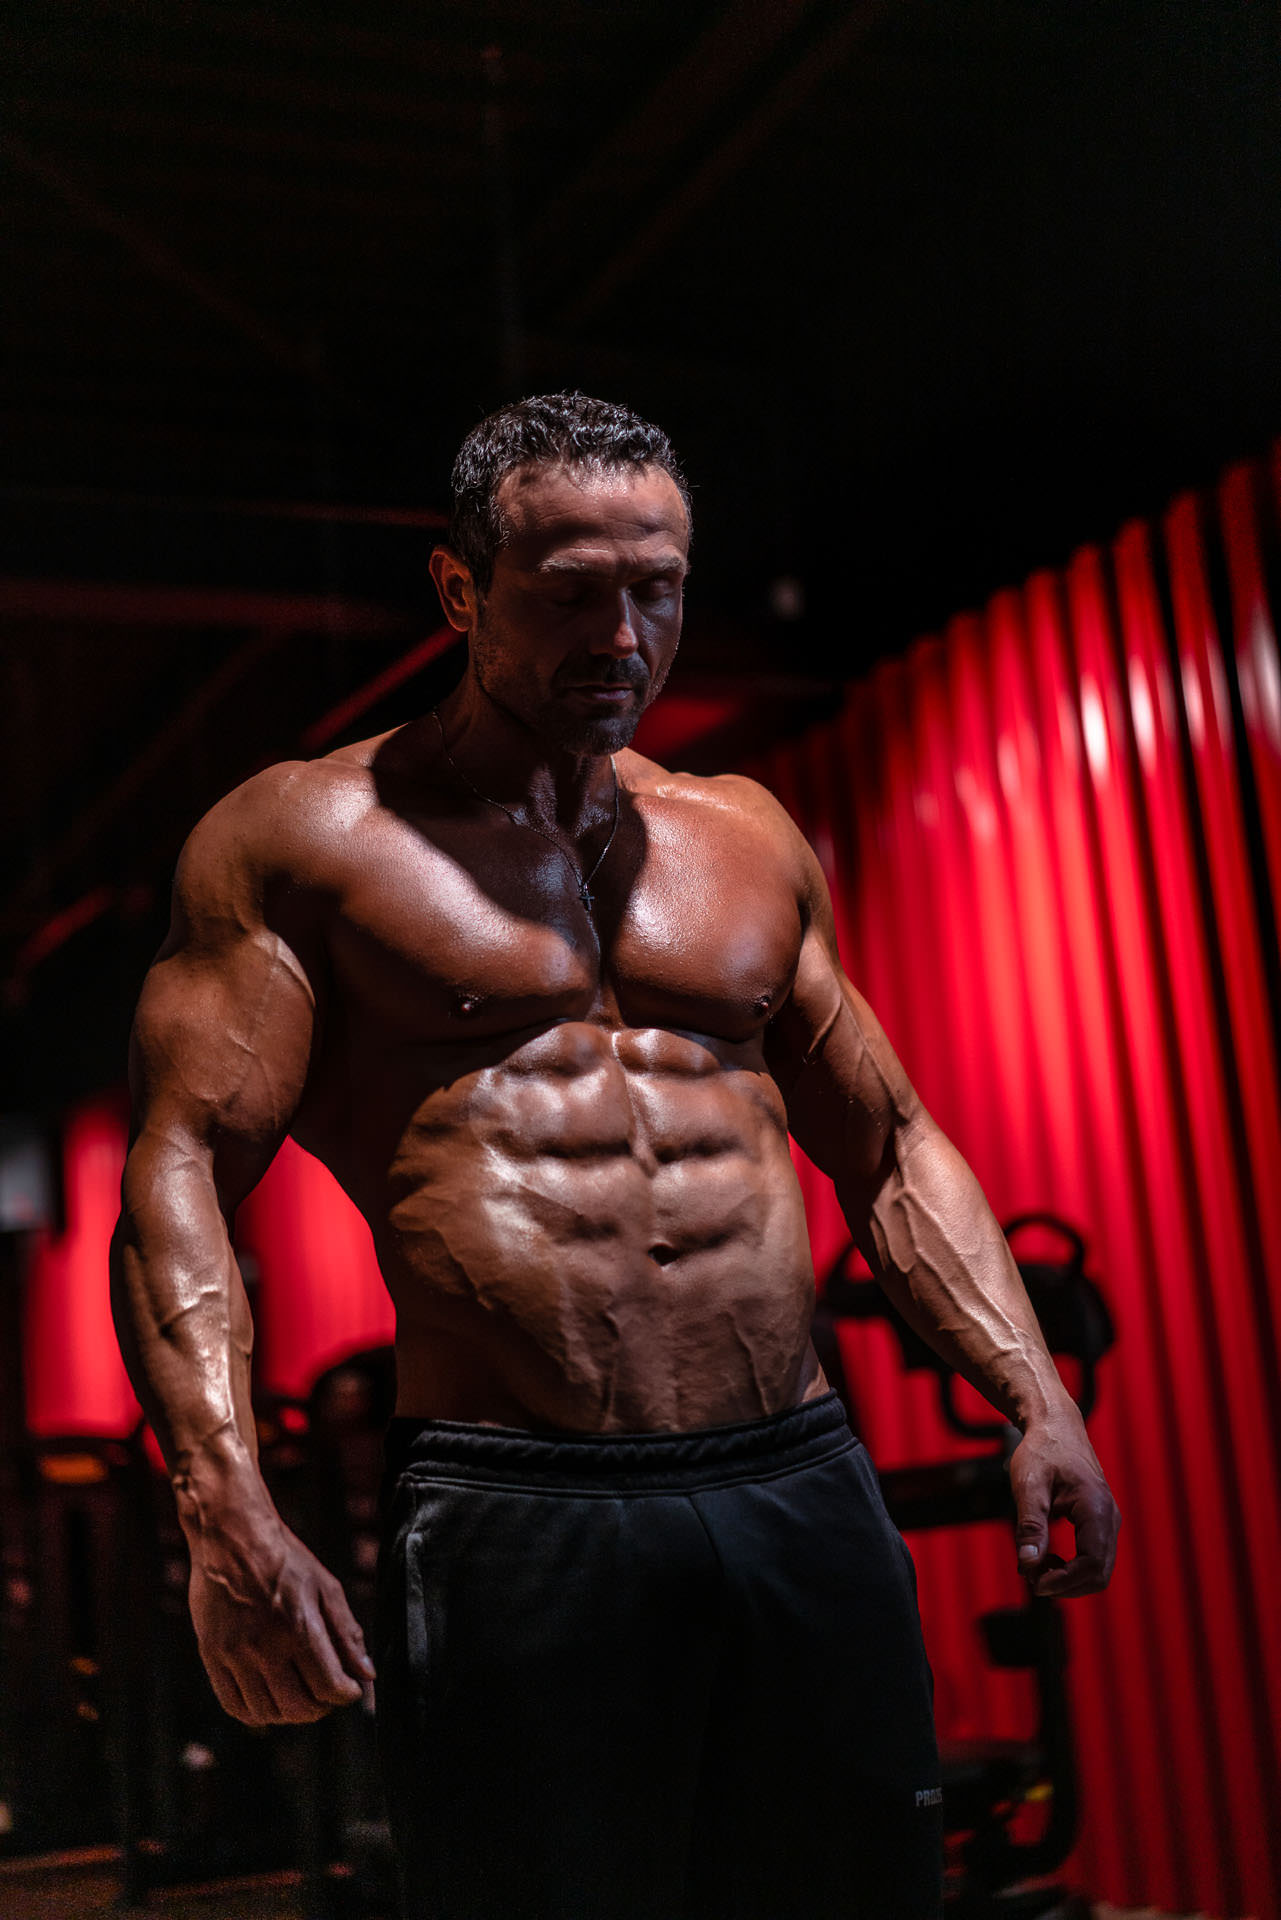 2019-03-04 - Enzo - Muscle & Fitness - 06854 - 1920px